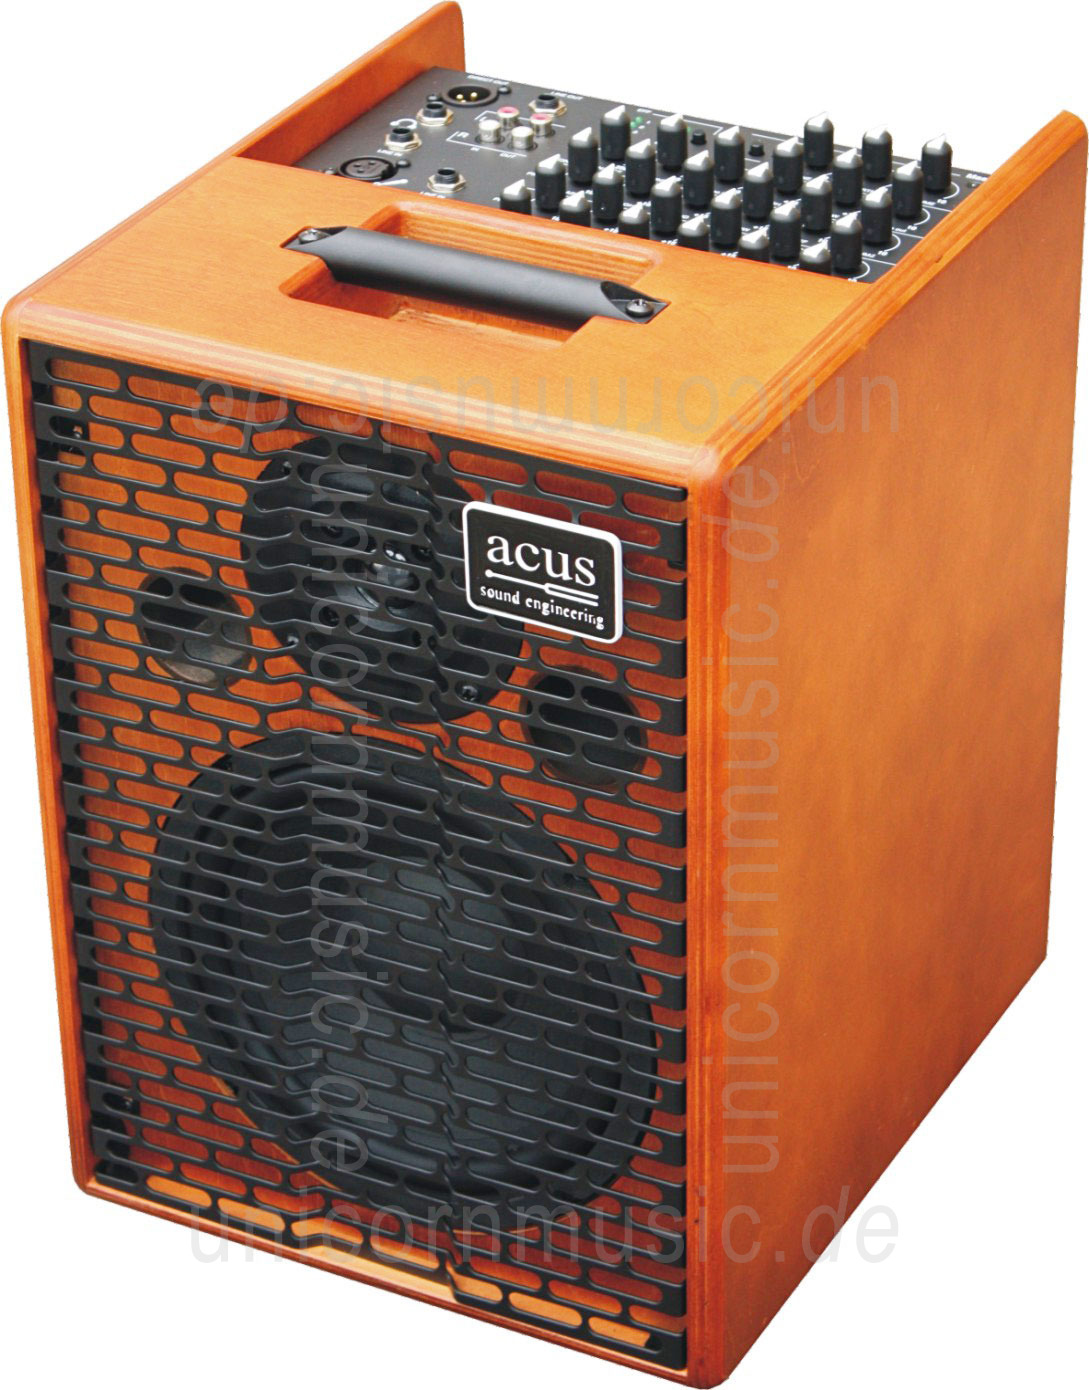 to article description / price Acoustic Amplifier - ACUS ONE 8 Wood M2 - 4x channel (3x instrumental / independently controllable)